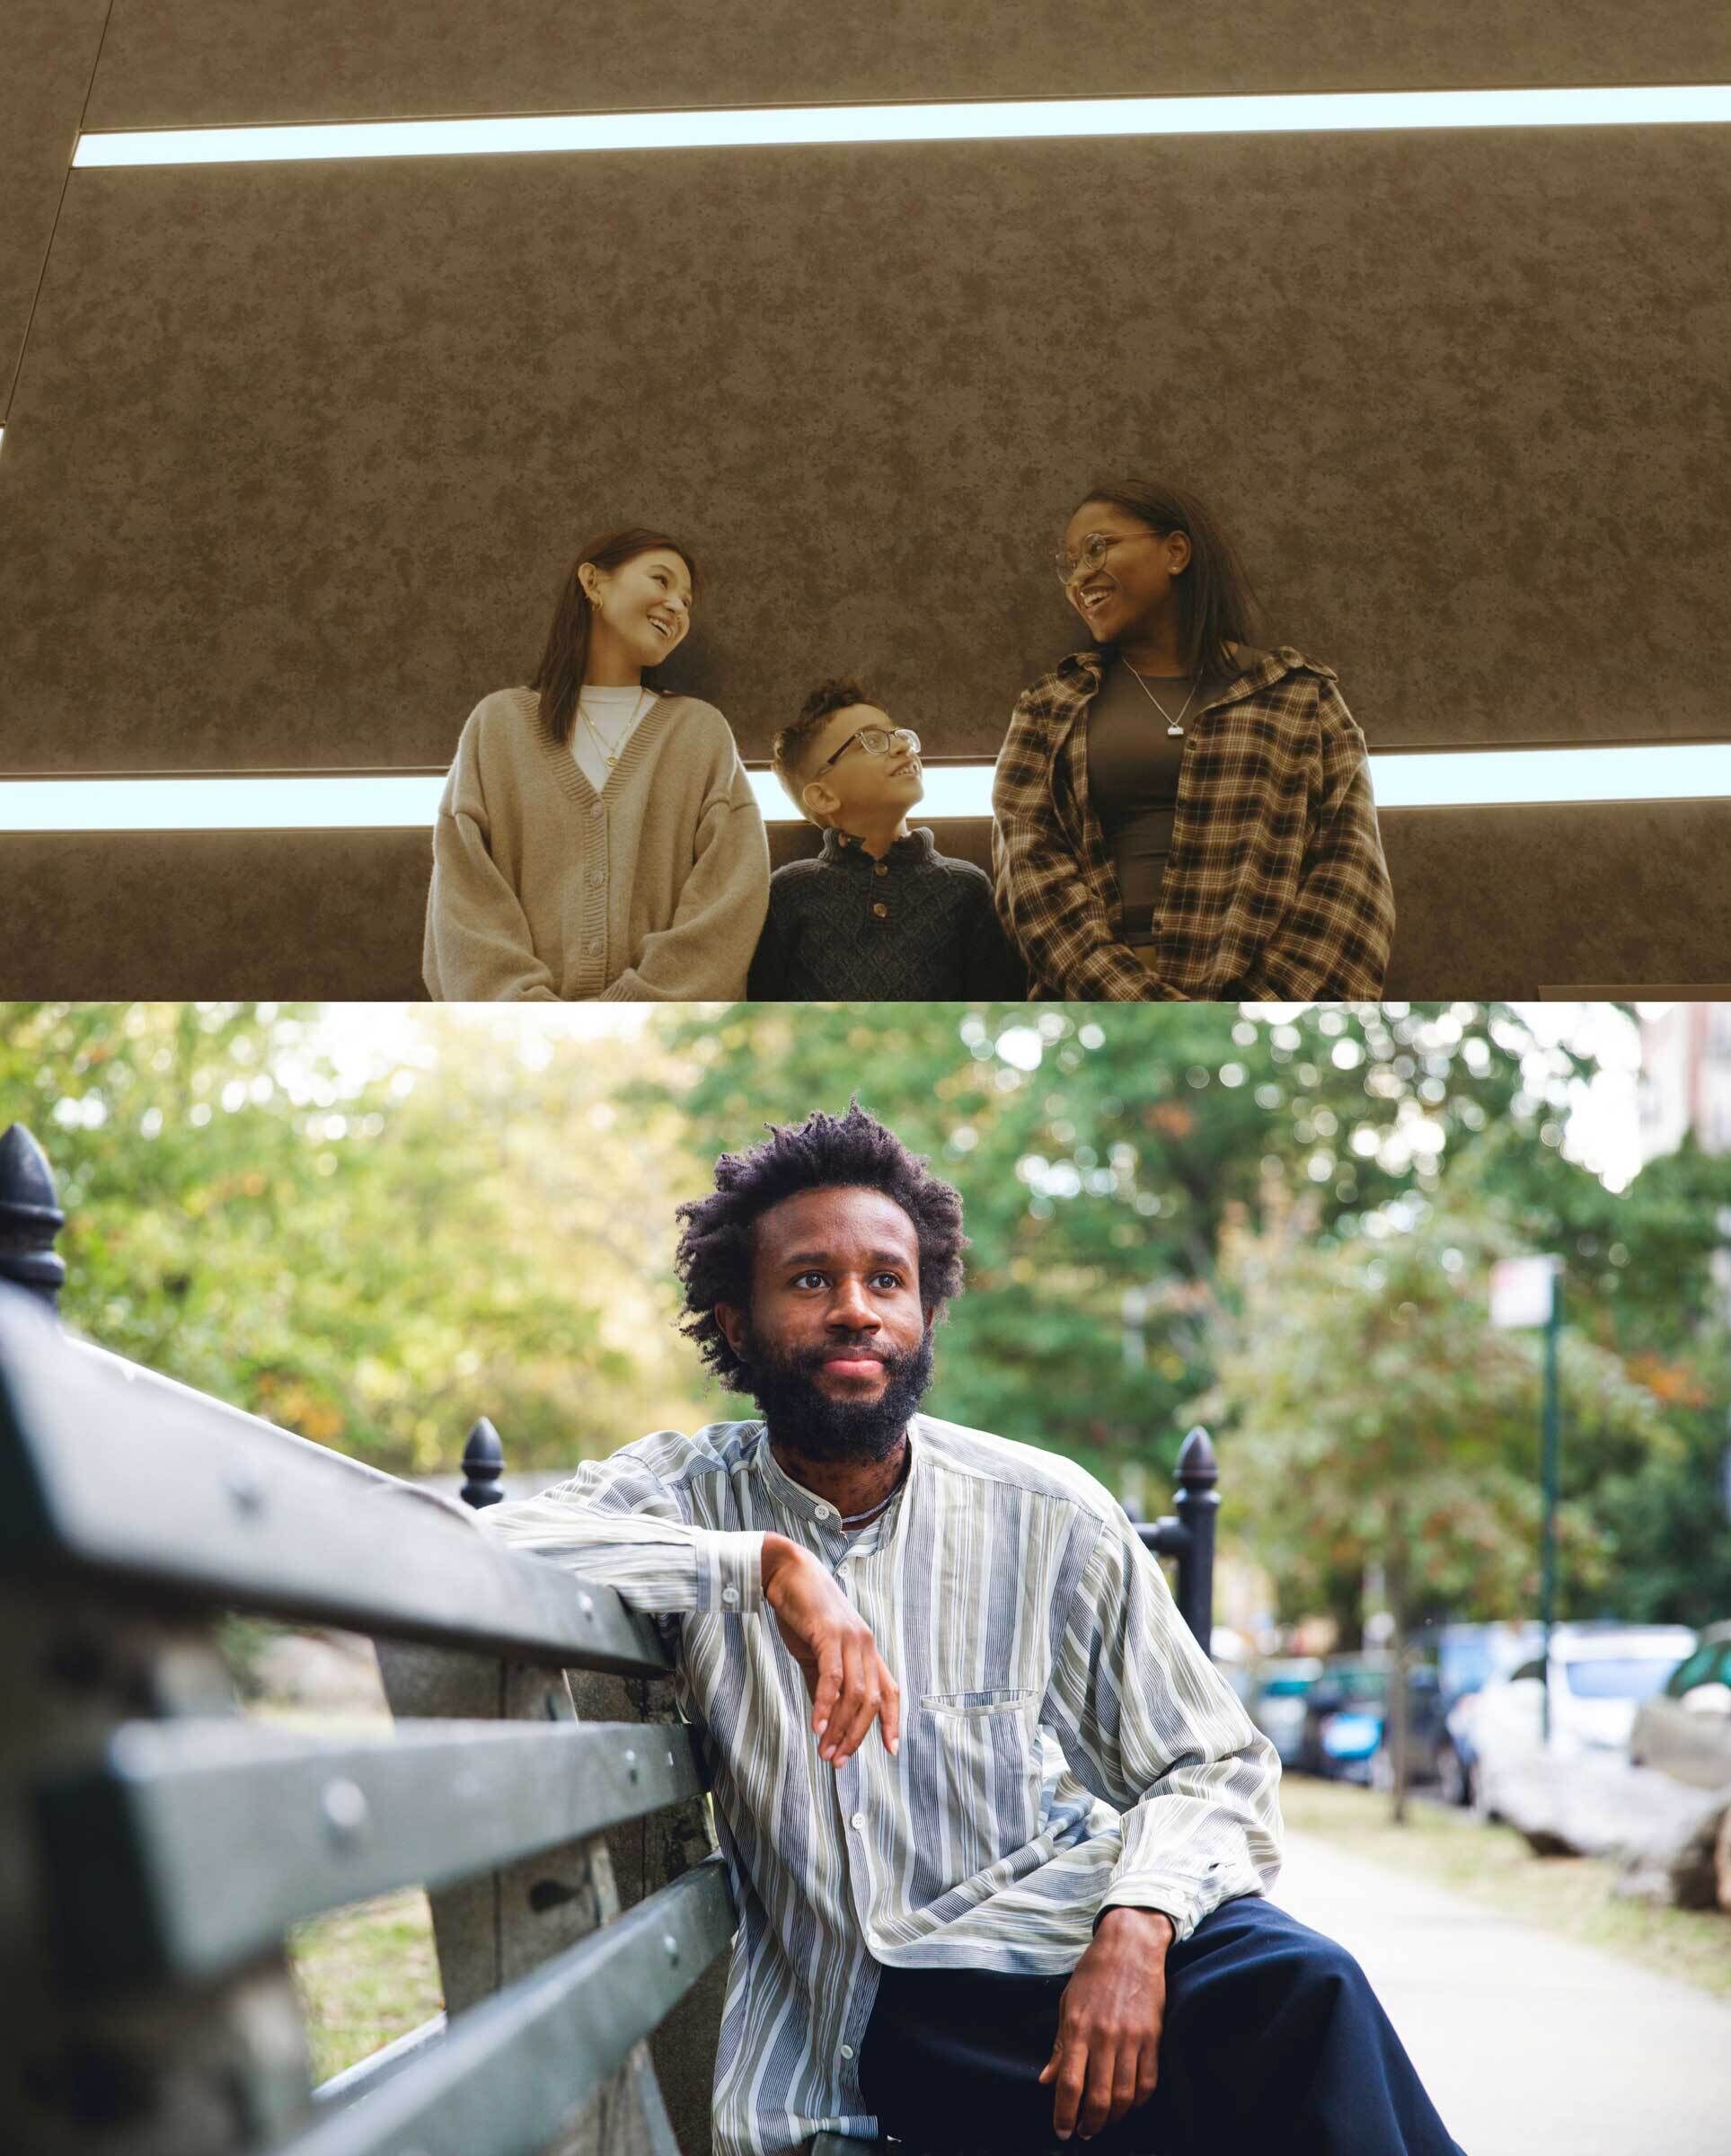 Two images: Top shows three people smiling and talking indoors. Bottom shows a man sitting on a park bench, looking thoughtful.